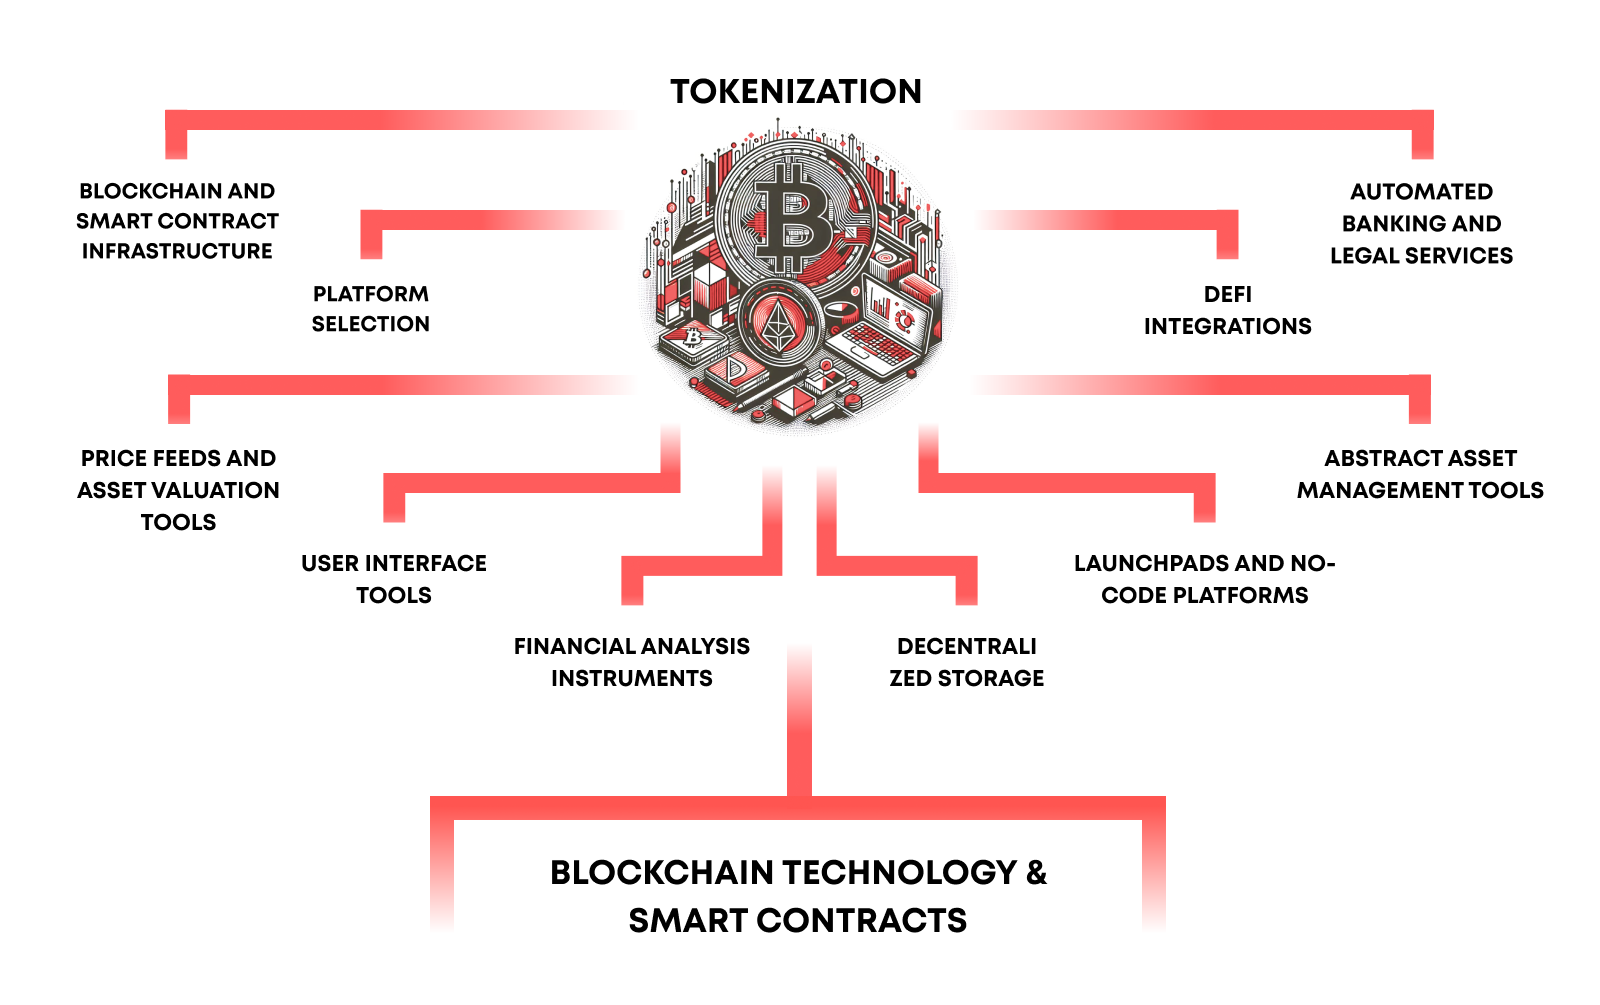 At the core of tokenization lies the blockchain, an immutable and transparent ledger that serves as the foundation for recording ownership and facilitating transactions.